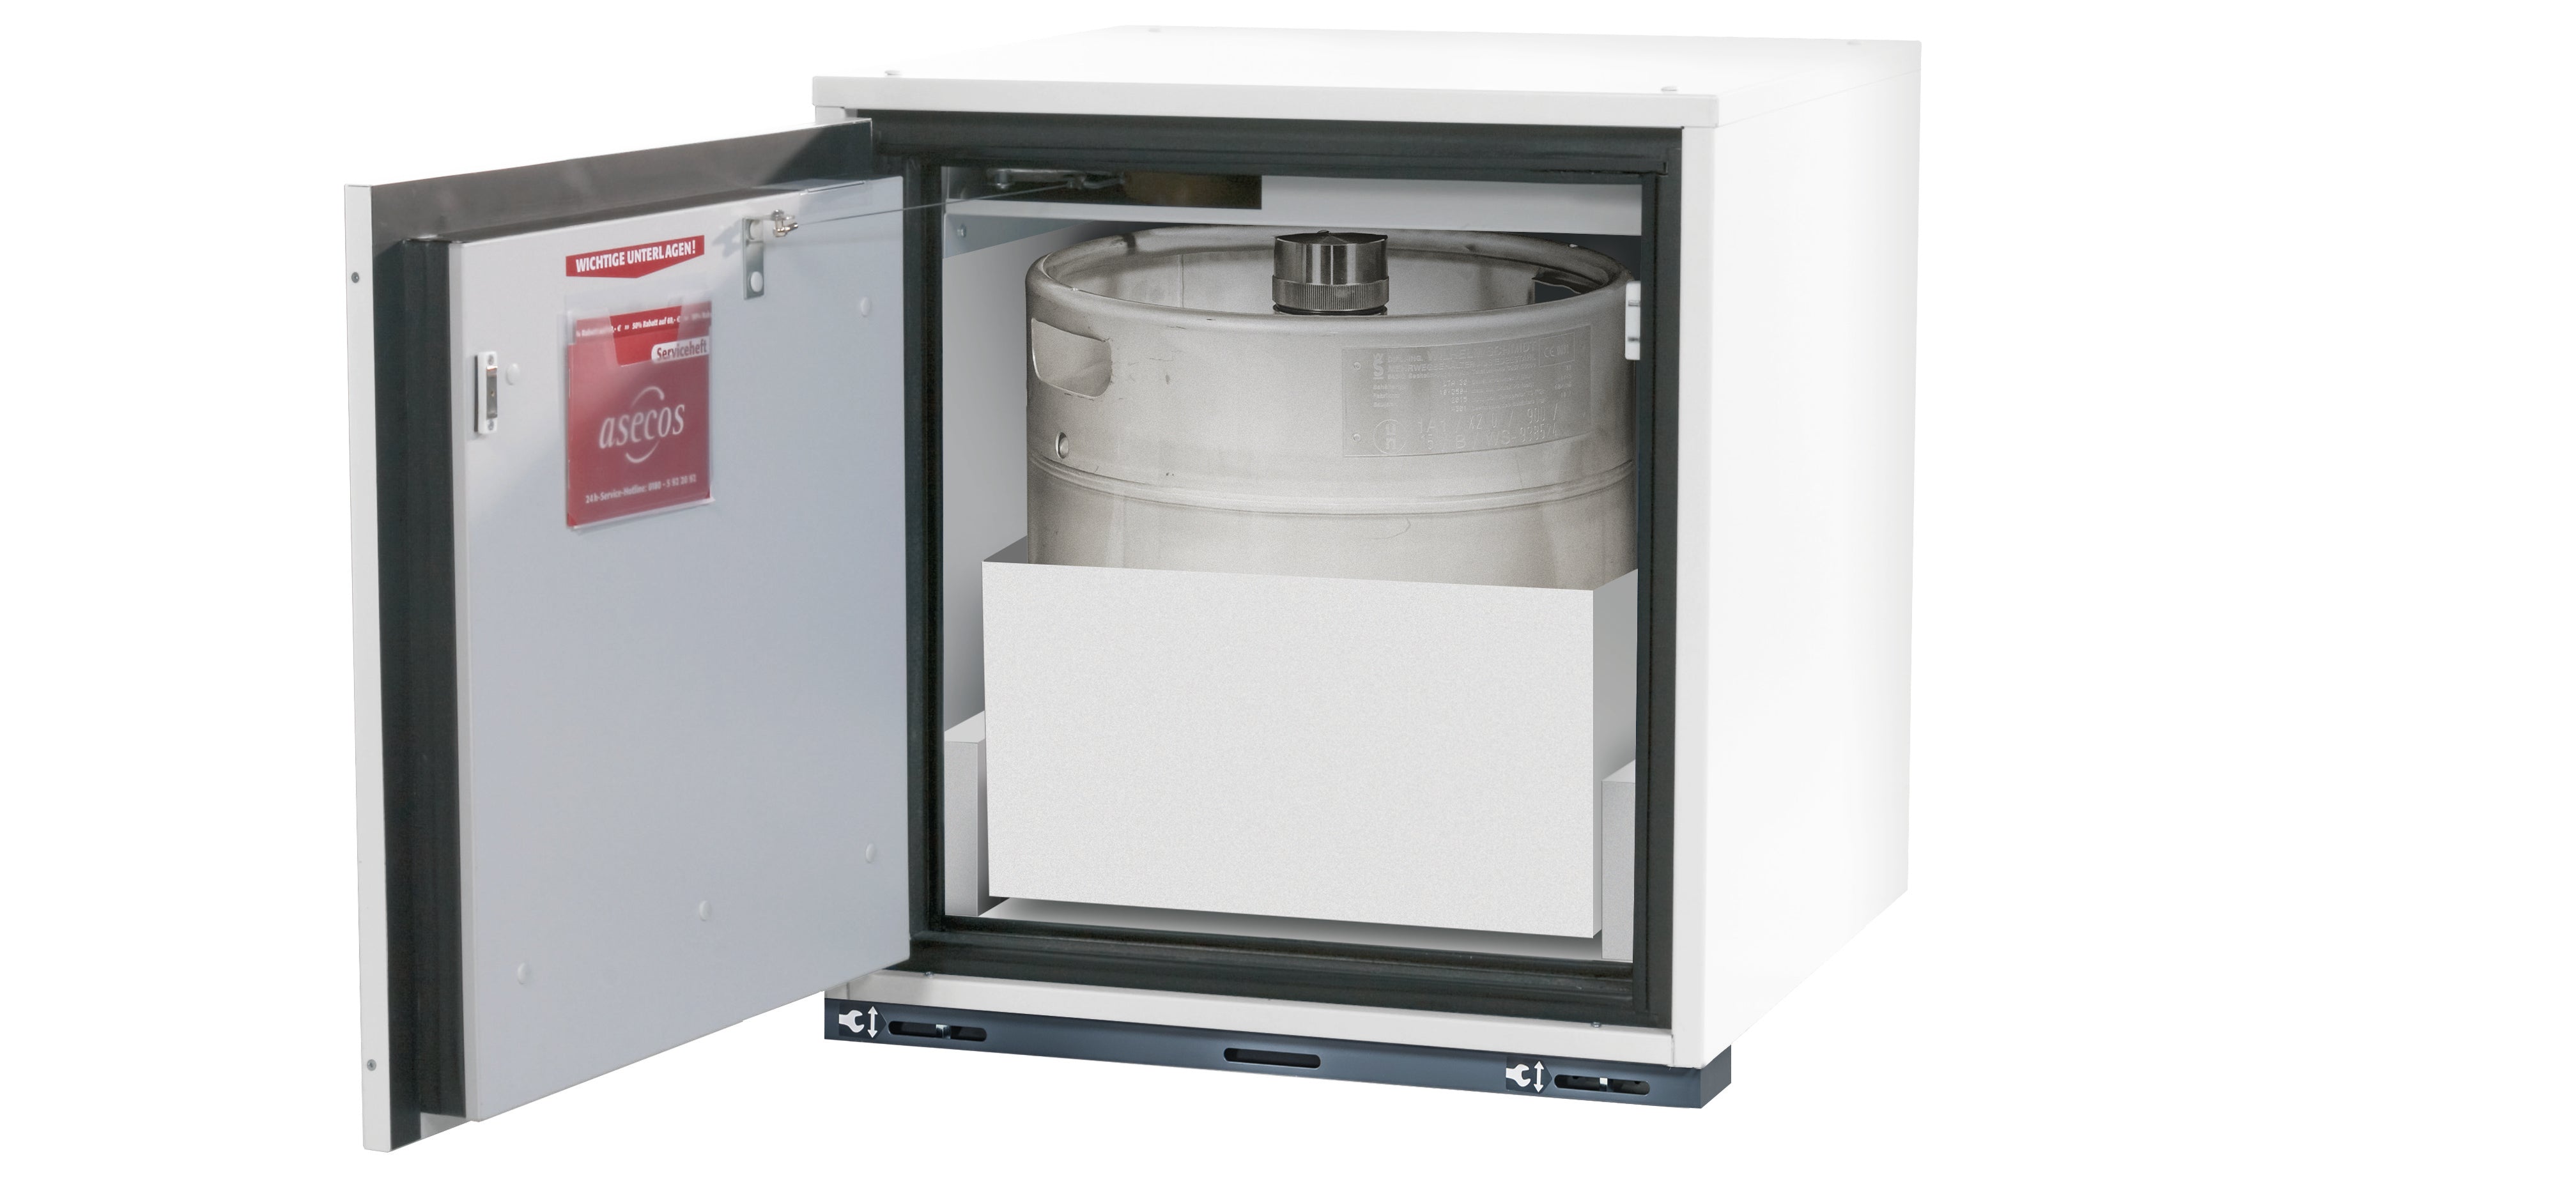 Type 90 safety base cabinet UB-T-90 model UB90.060.059.UL.T in laboratory white (similar to RAL 9016) with 1x pull-out tray STAWA-R max. interior height (sheet steel)